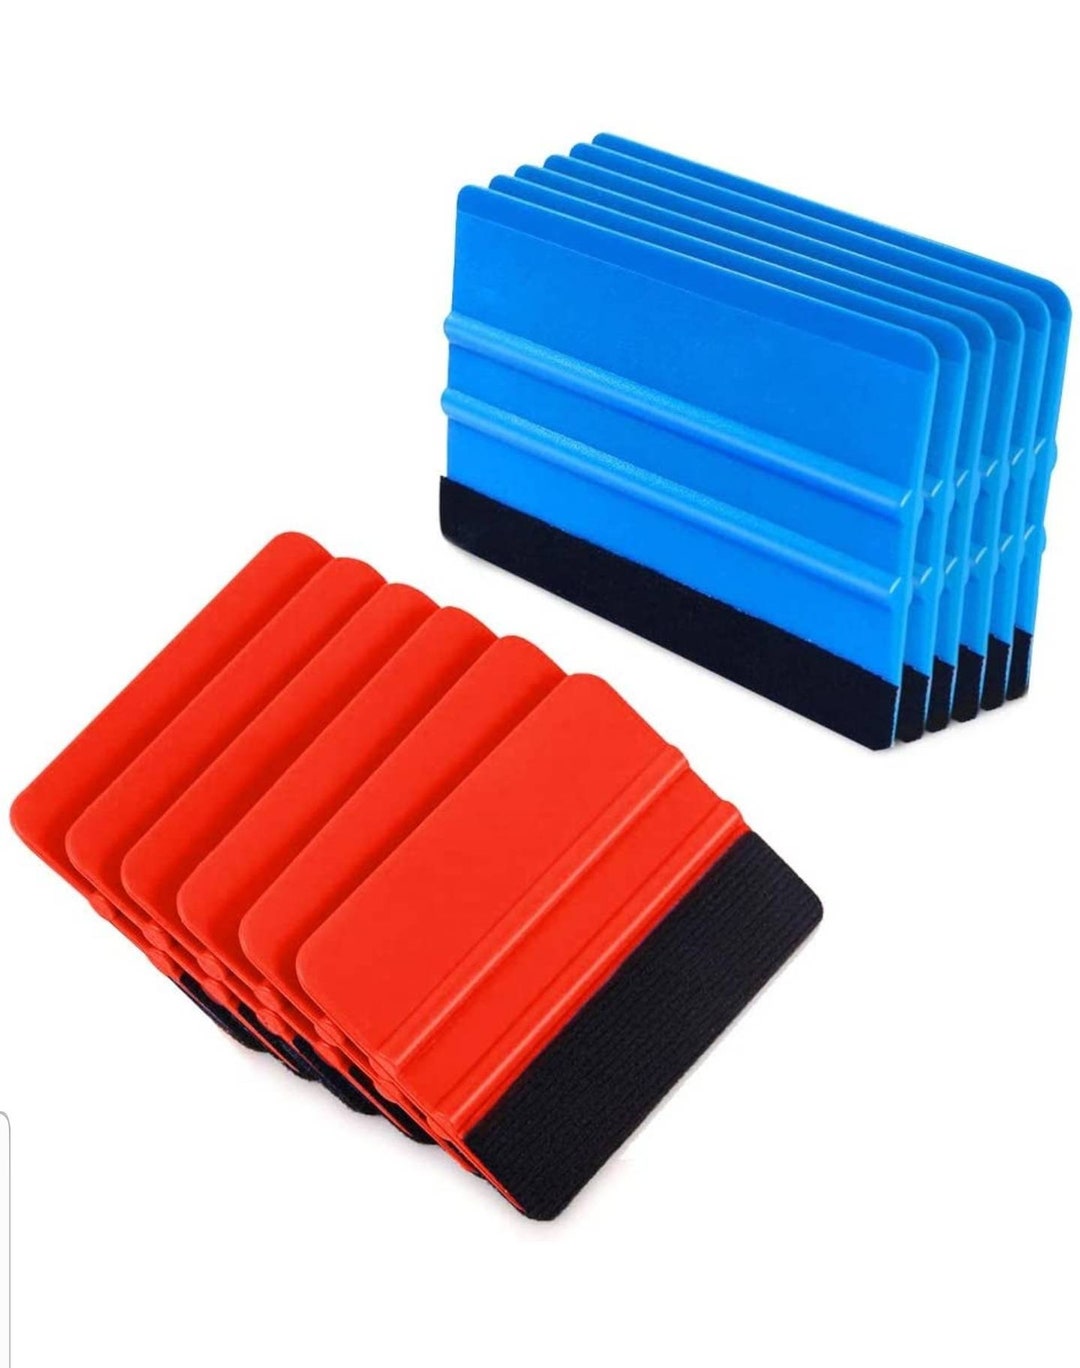 Squeegee Mini Spatula for Silkscreens Silicone Rubber Tip Polymer Clay  Paint Scraper Tool 